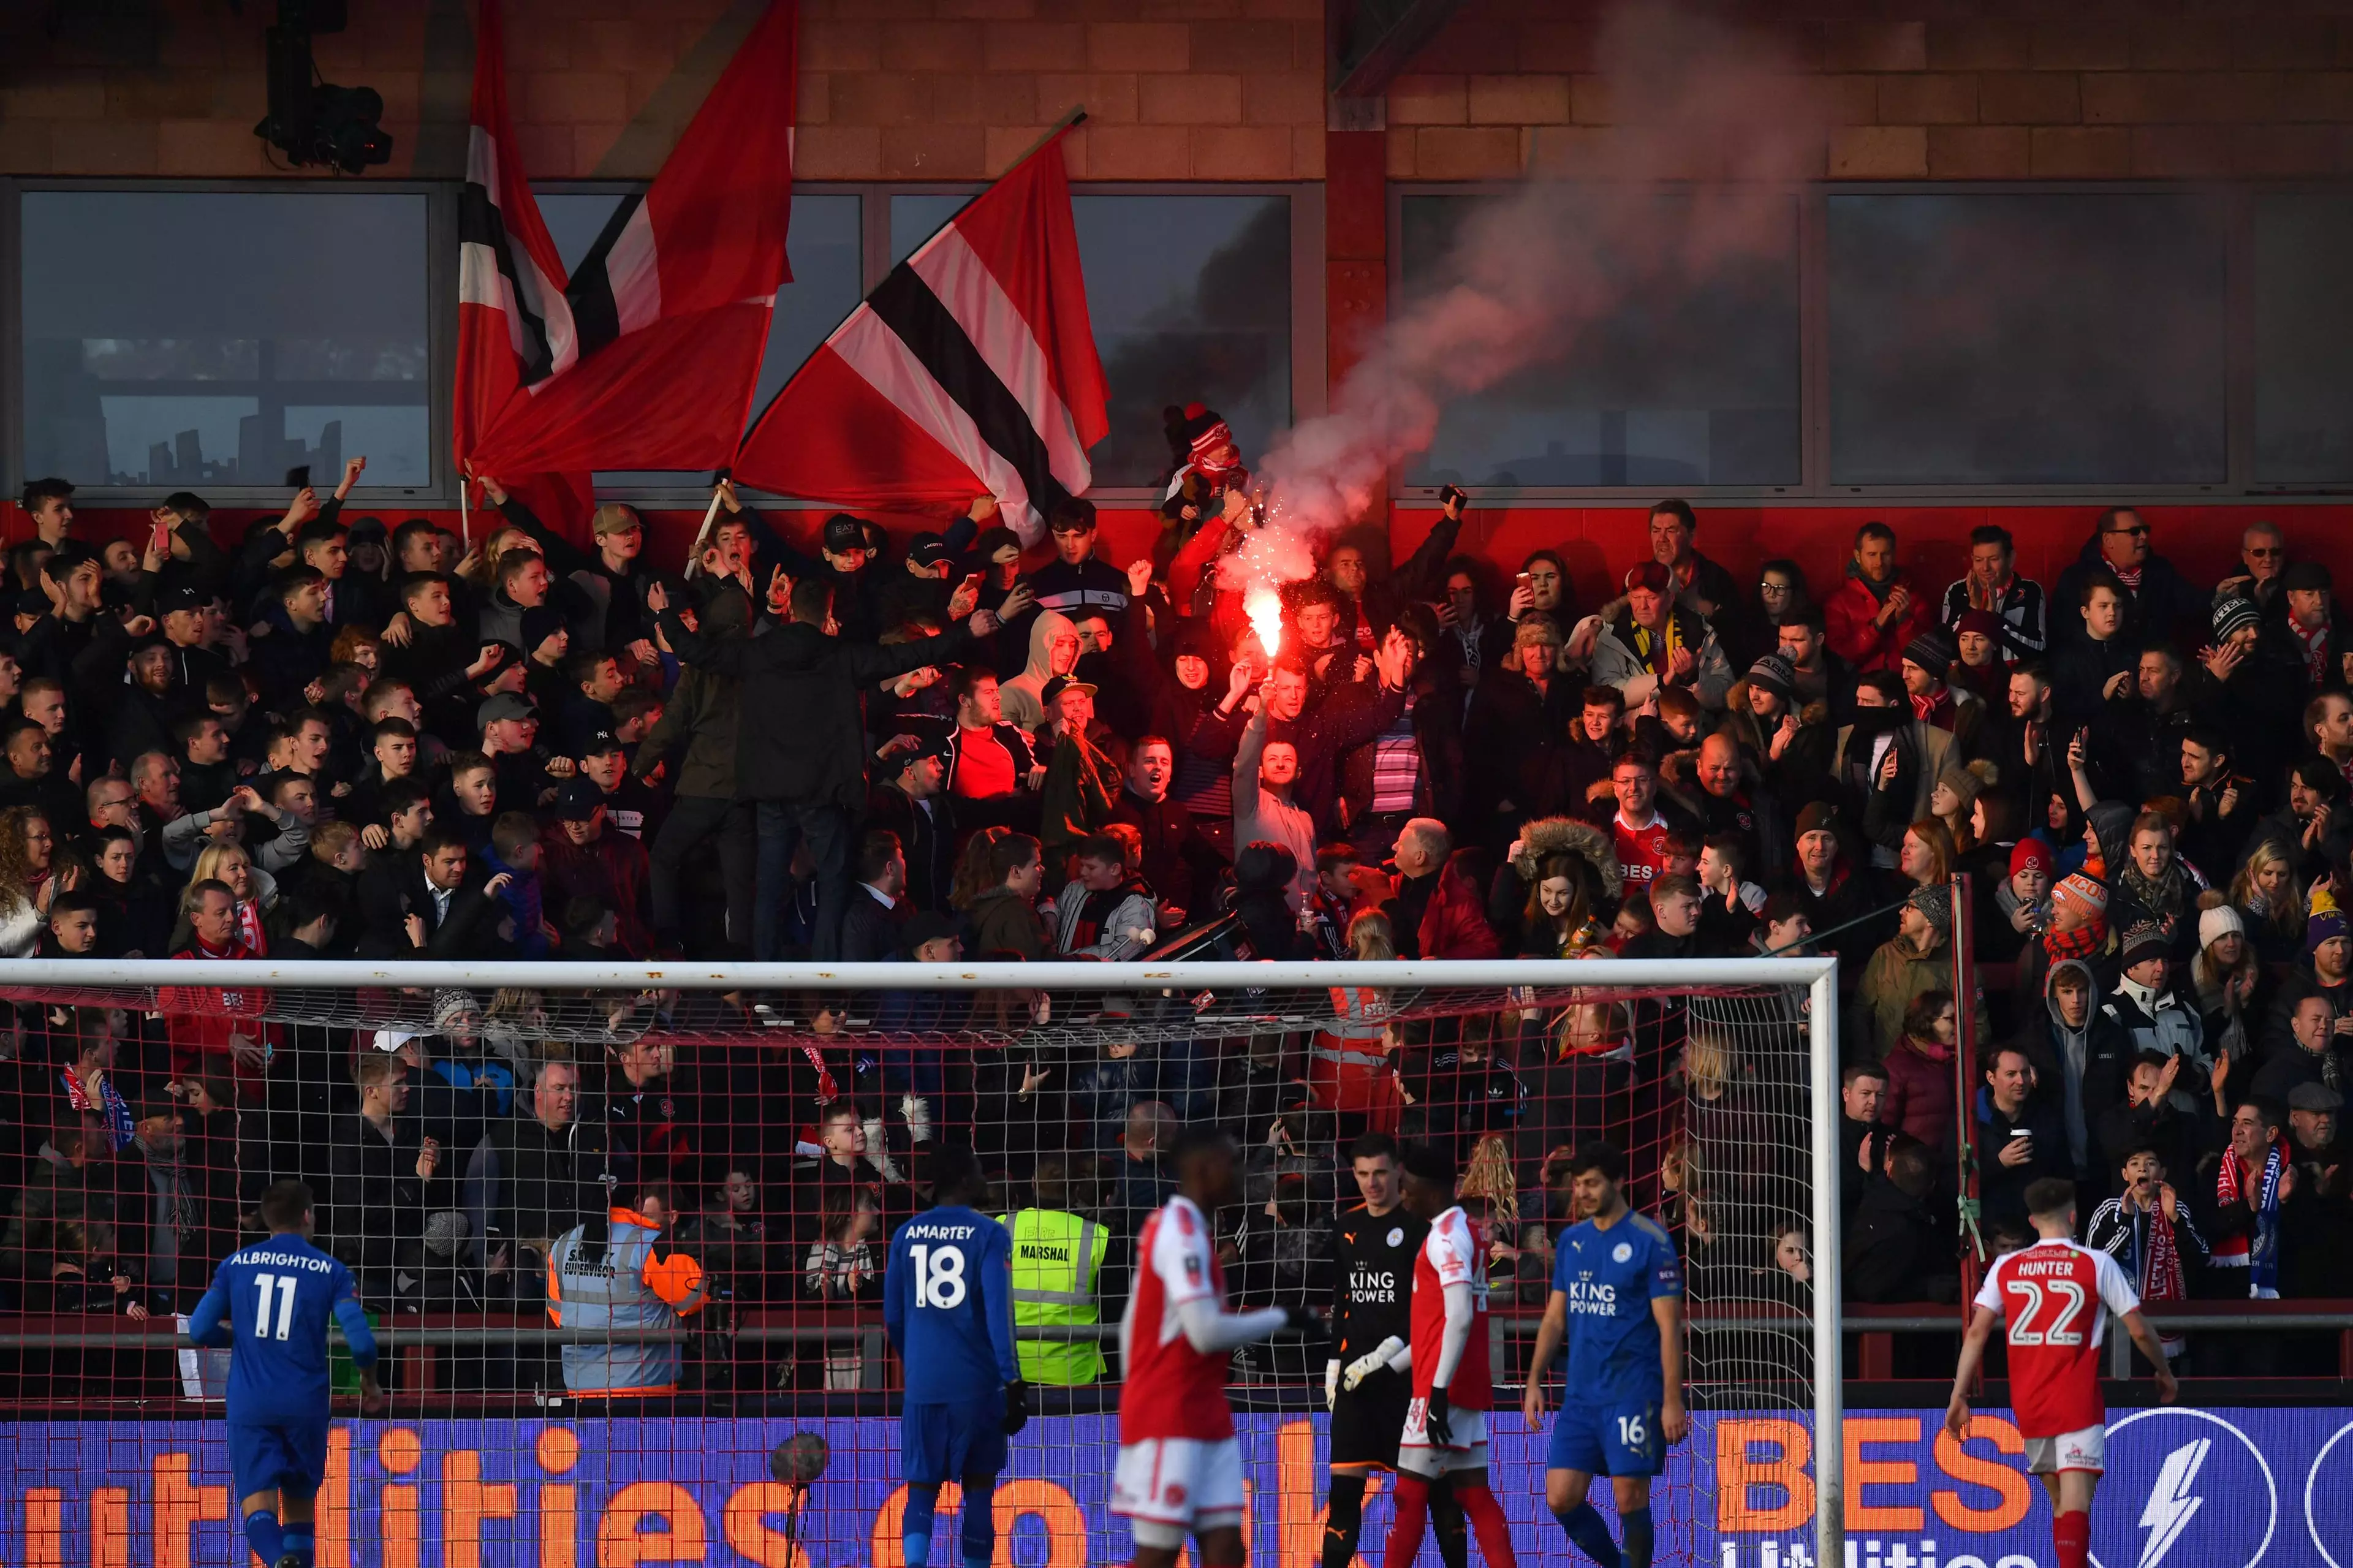 Fleetwood fans were loving life as they drew 0-0 with Leicester. Image: PA Images.